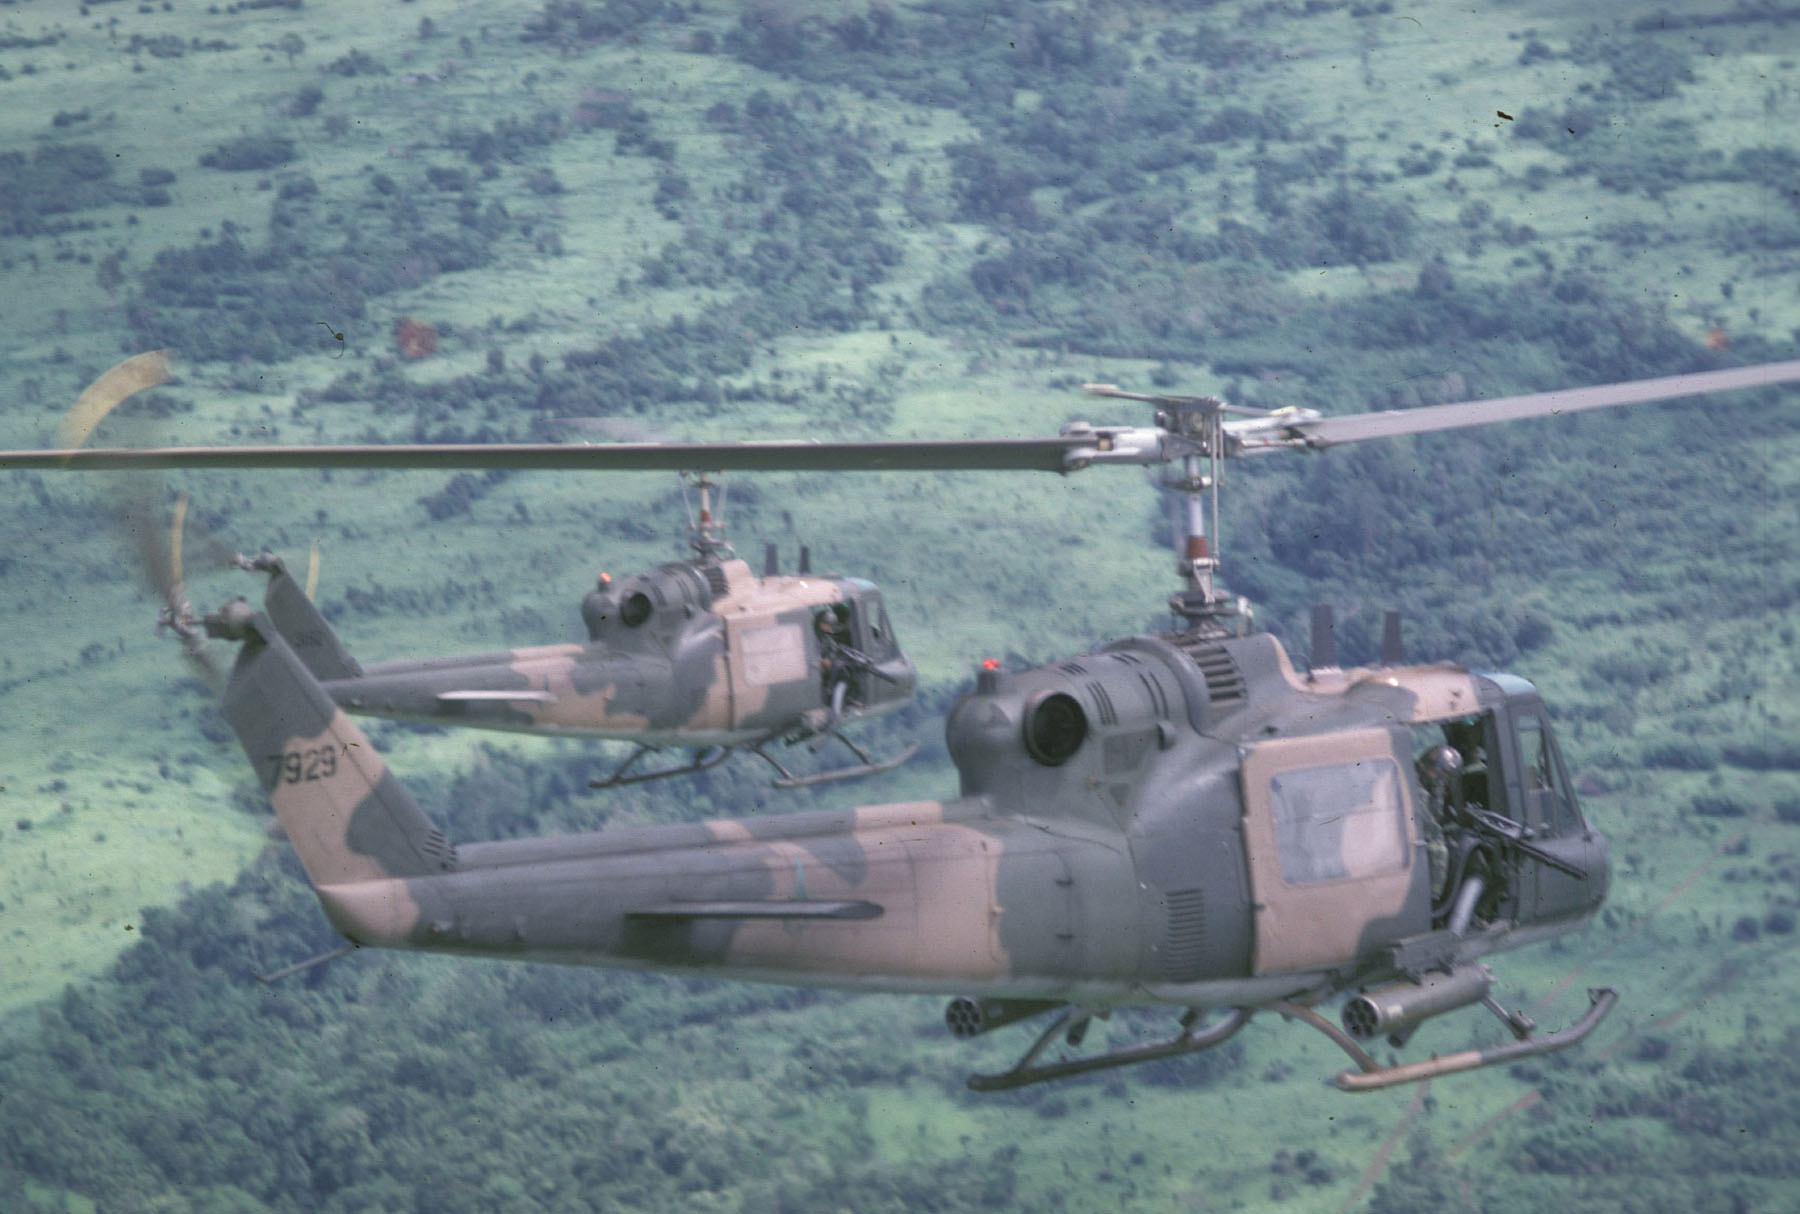 Two U.S. Air Force UH-1P Hueys of the 20th Special Operations Squadron, the "Green Hornets". (U.S. Air Force)